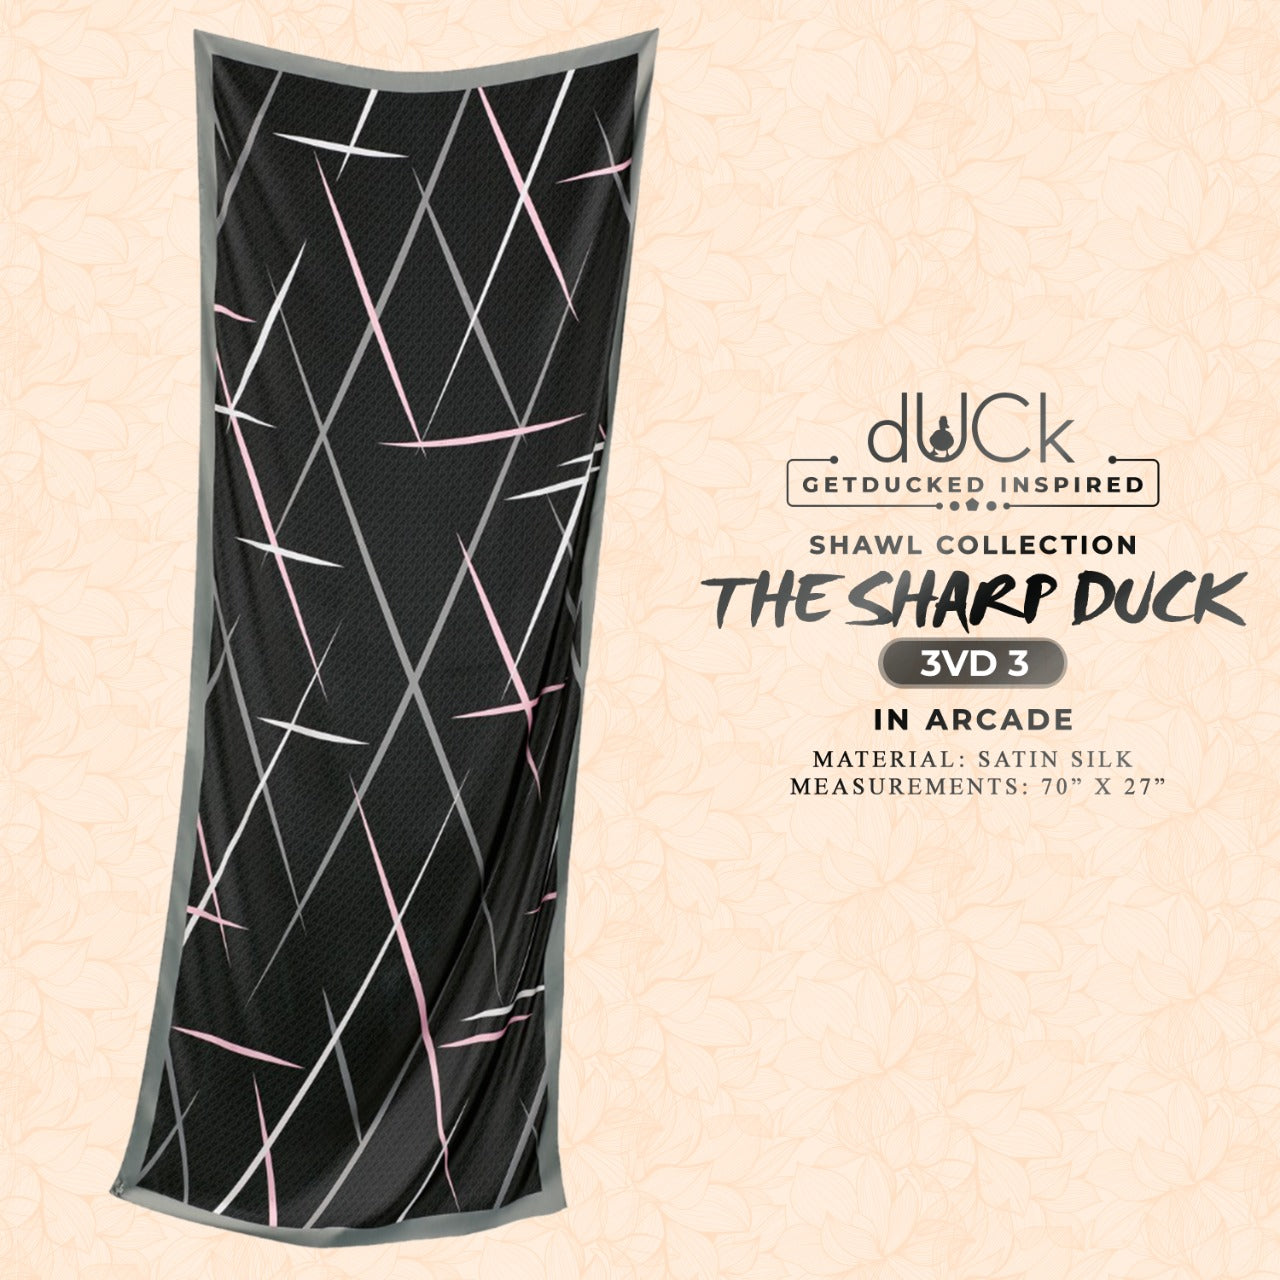 The Sharp dUCk Inspired Shawl Collection